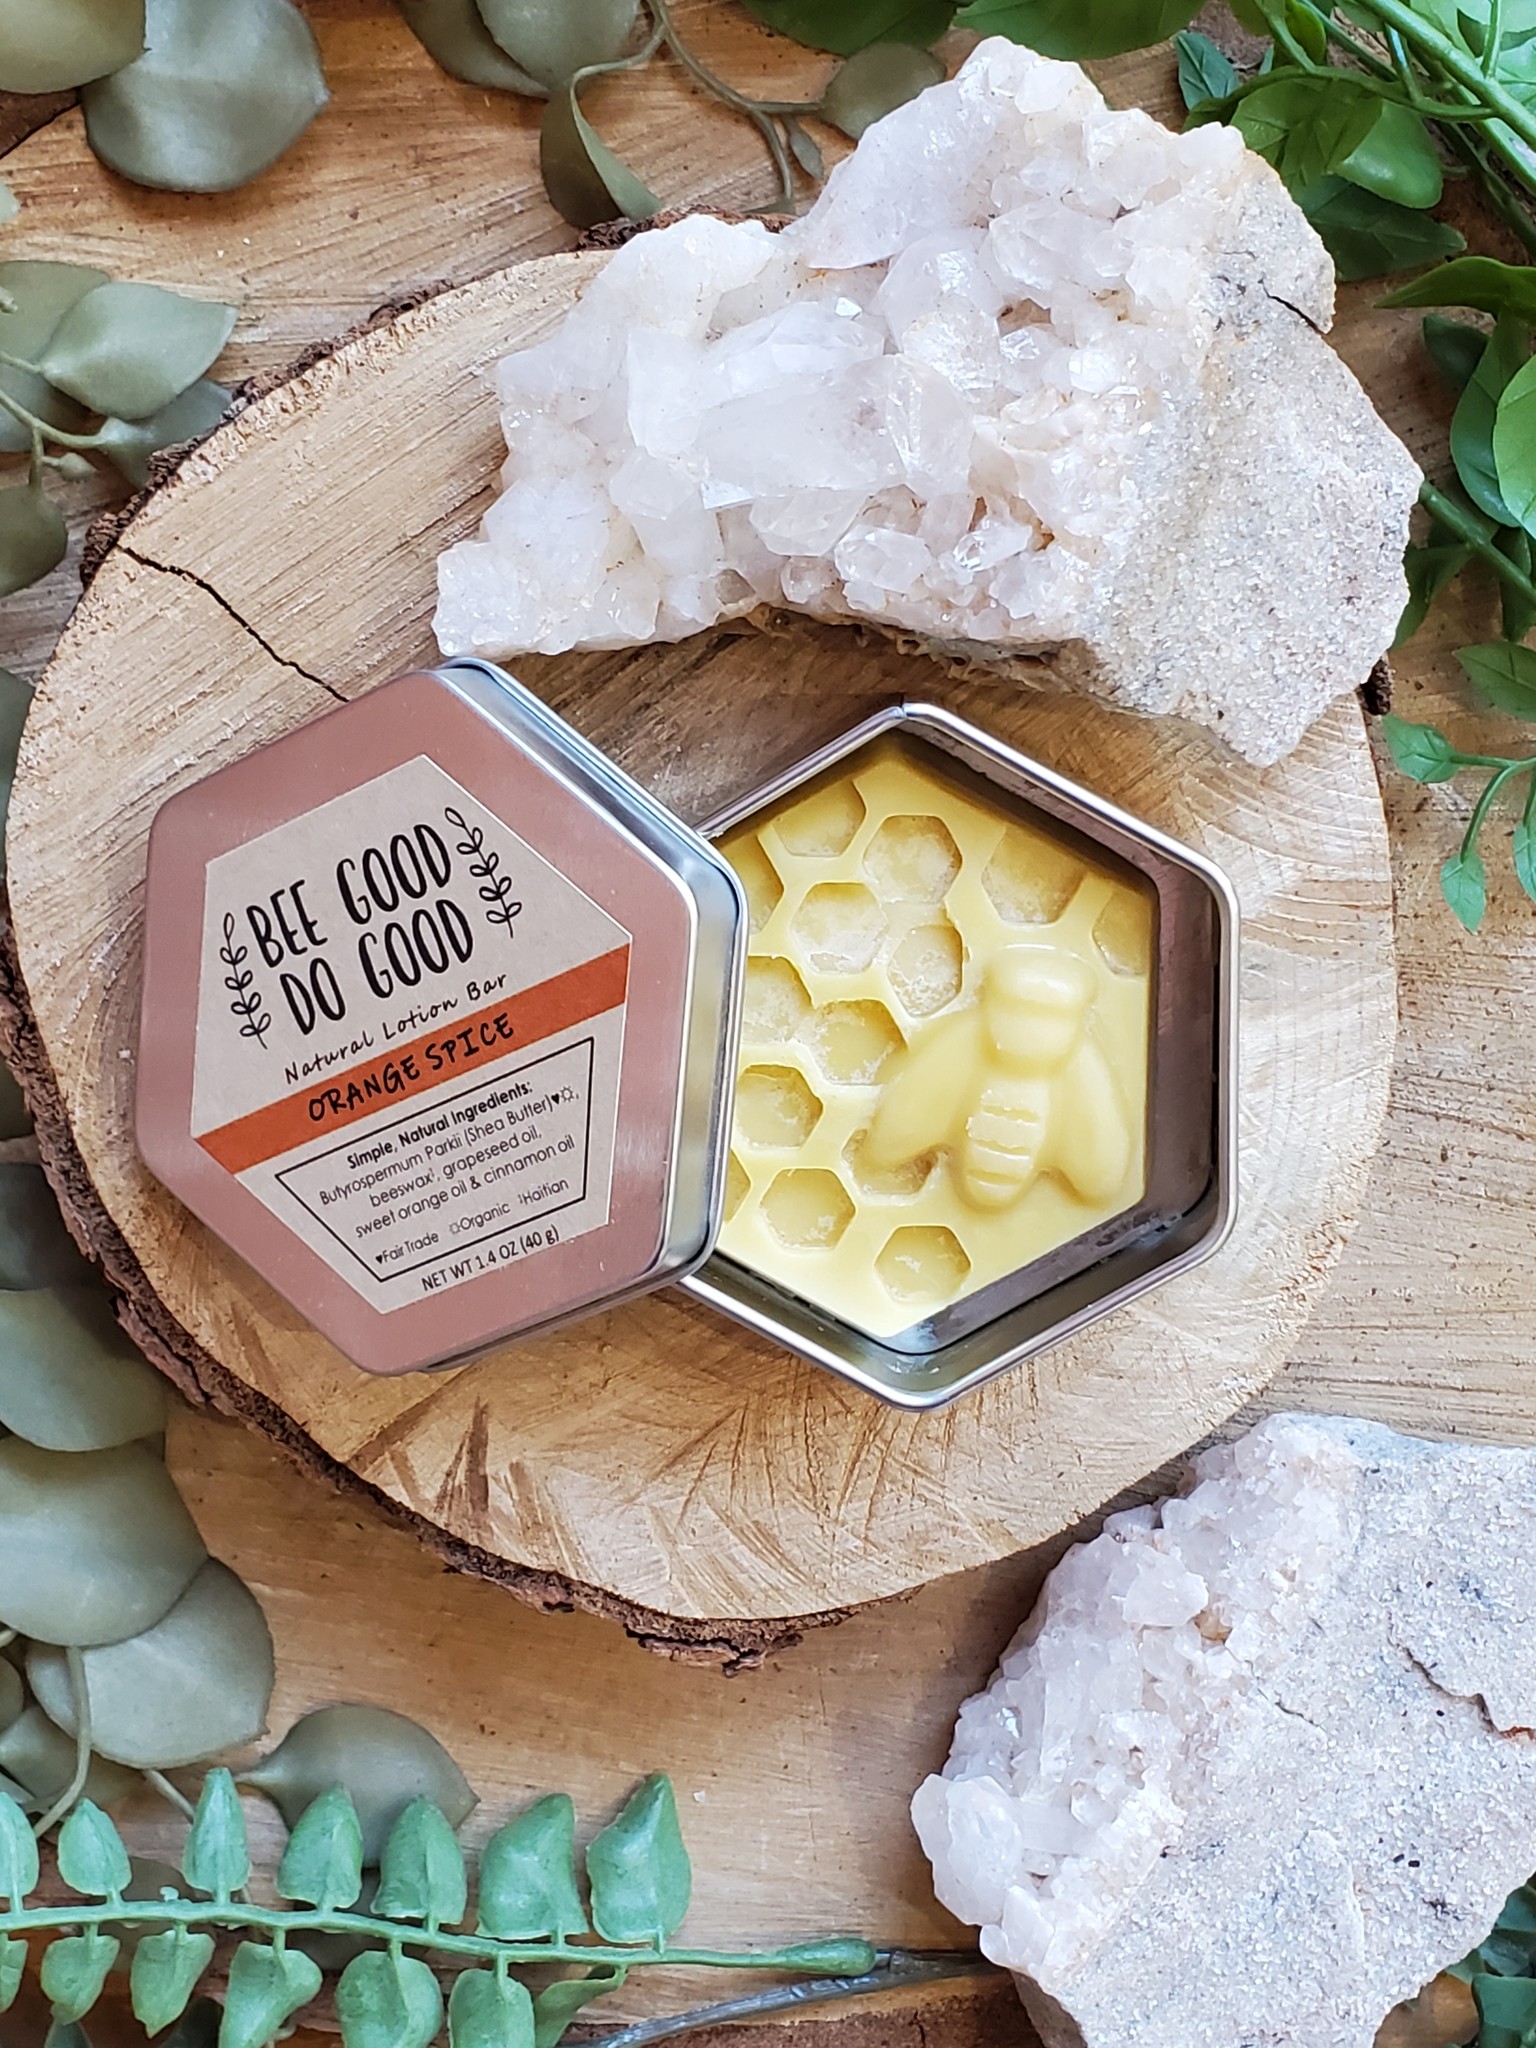 Simple All Natural Beeswax Lotion Recipe